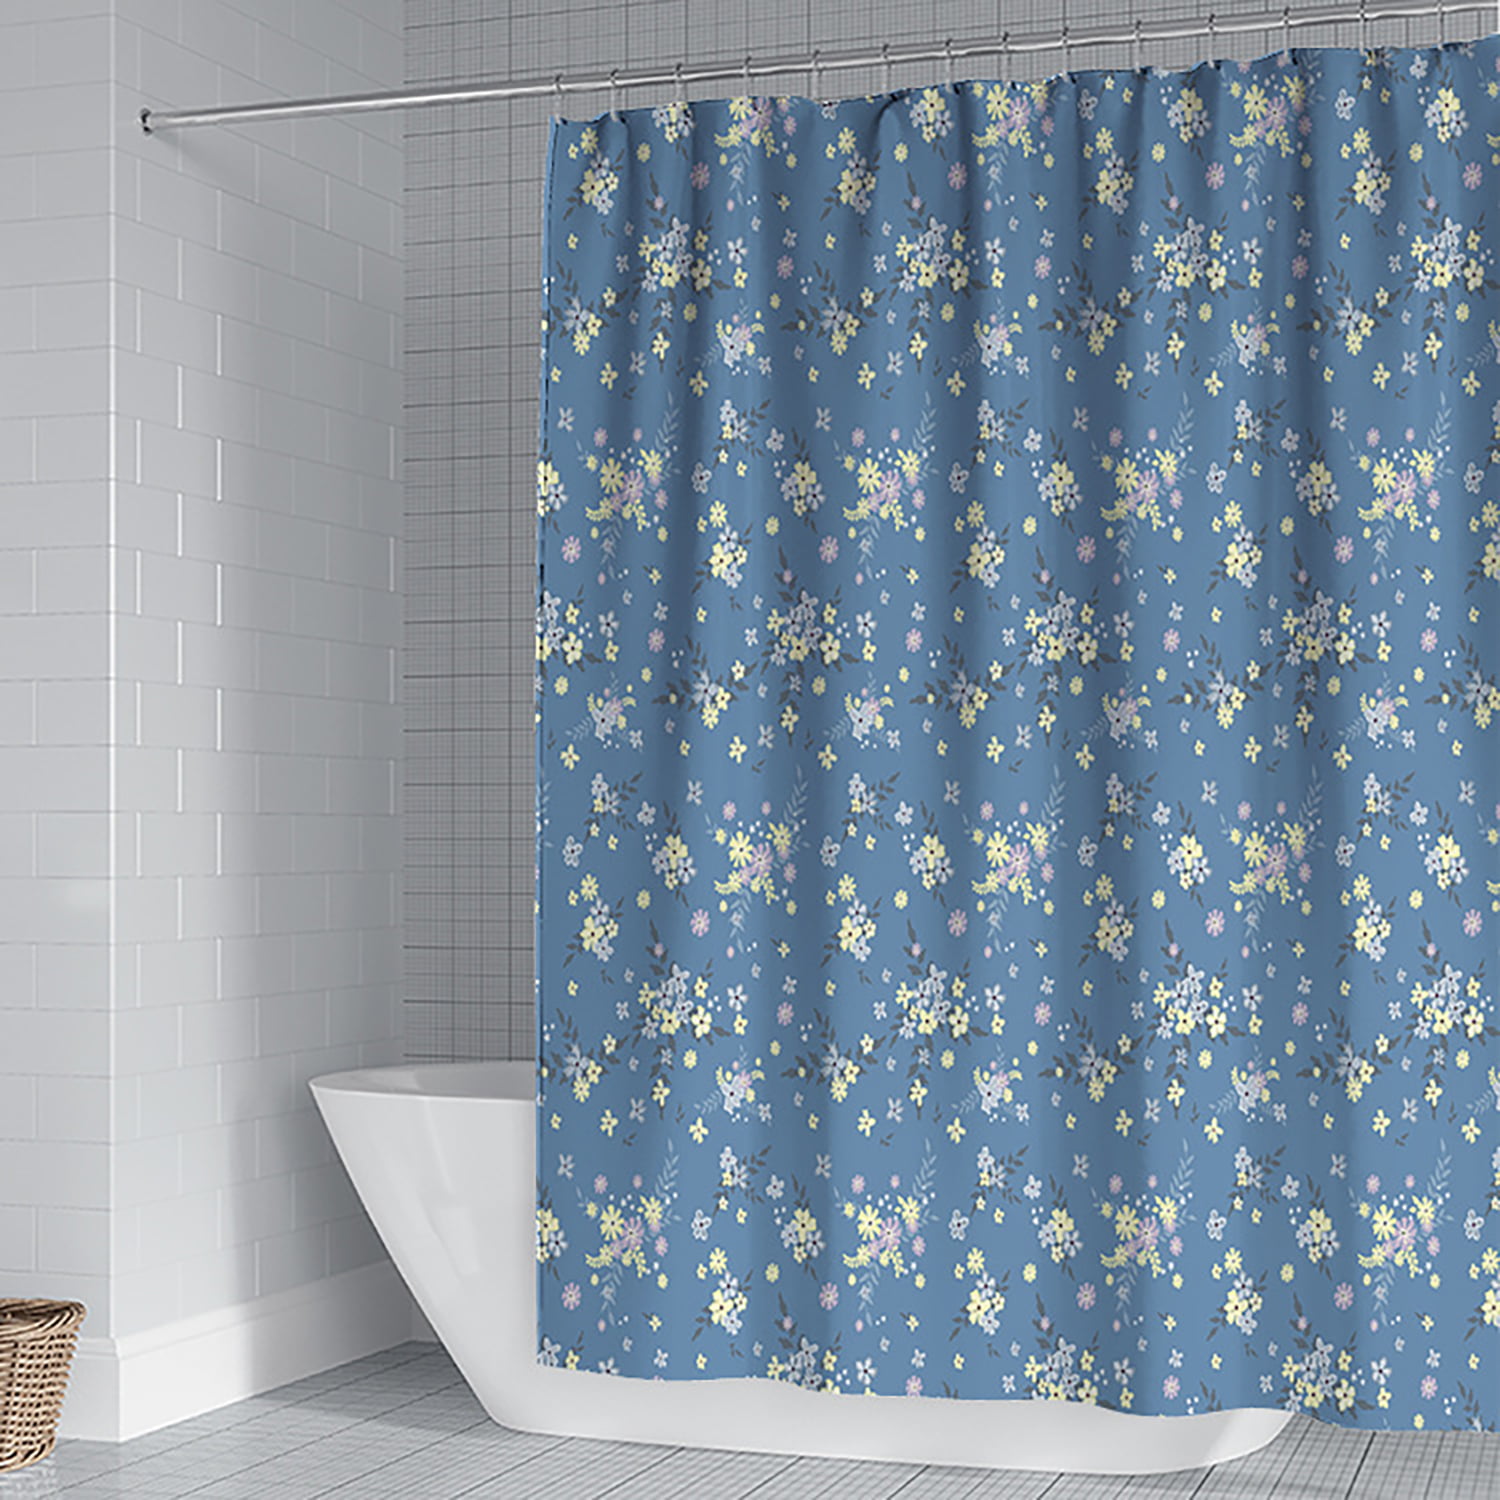 Details about   SHOWER CURTAIN BATHROOM LONG WATERPROOF POLYESTER 180x180 cm WASHABLE PRINT 